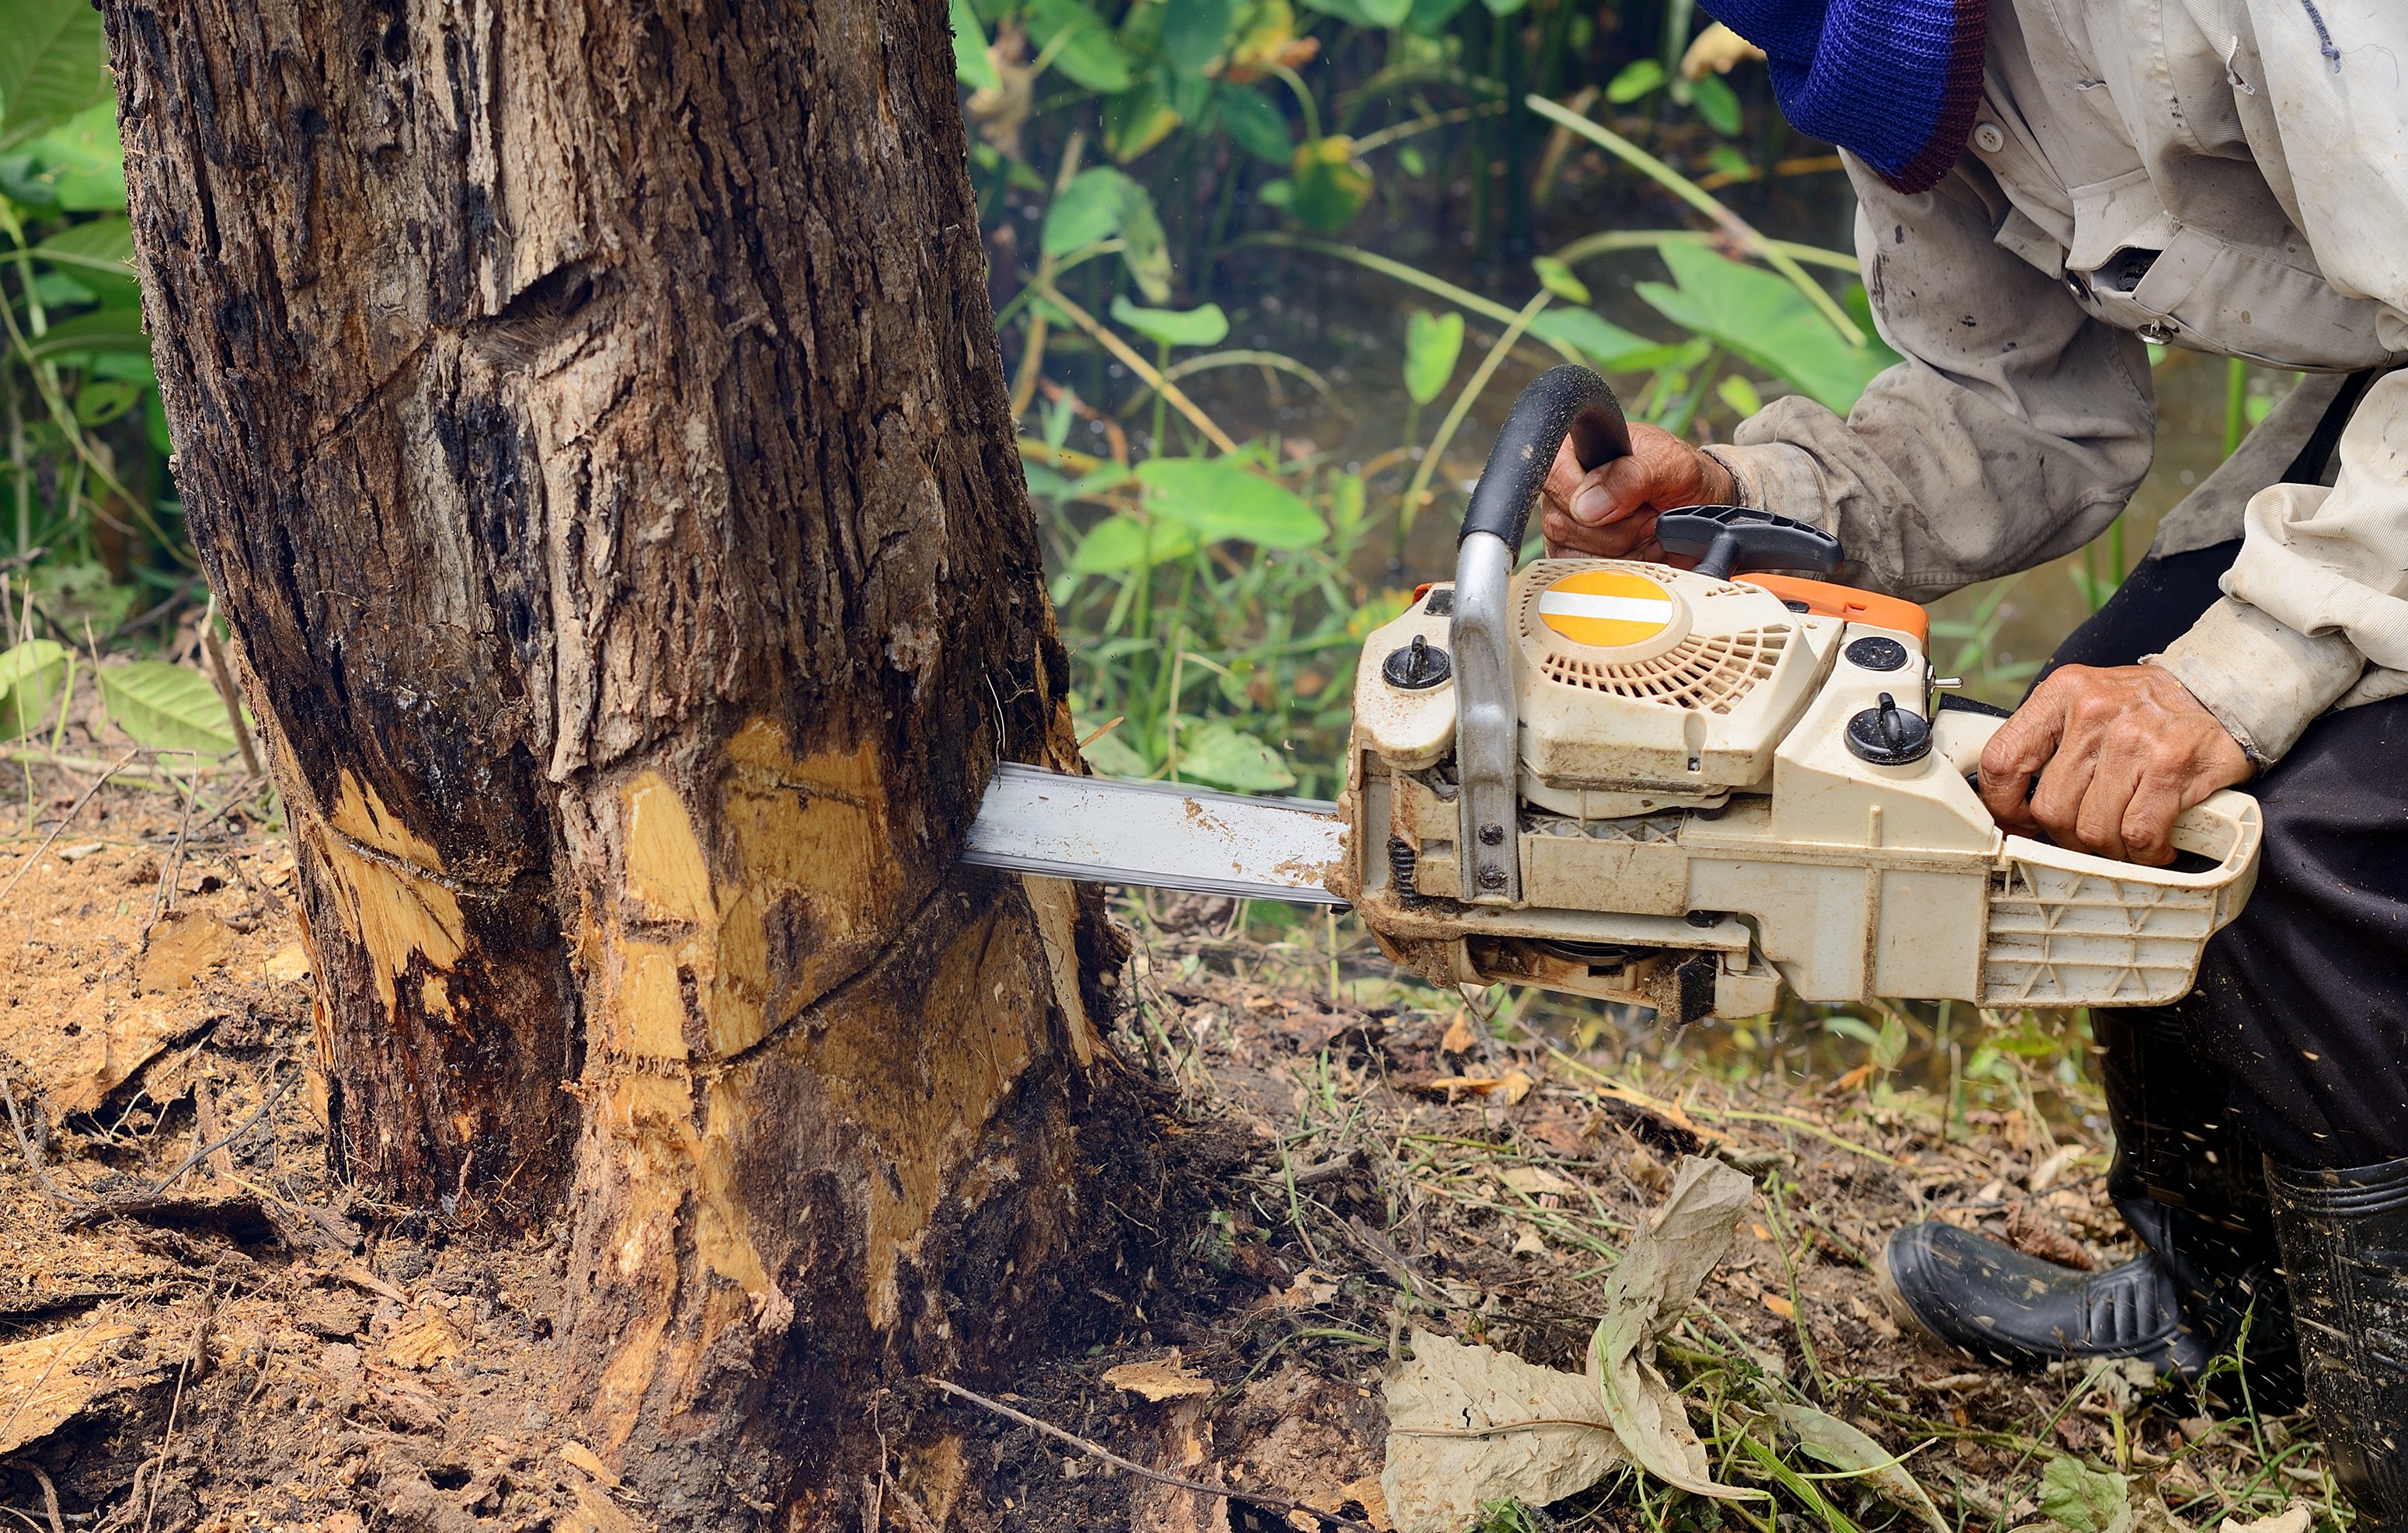 A man cutting down a tree with a chainsaw